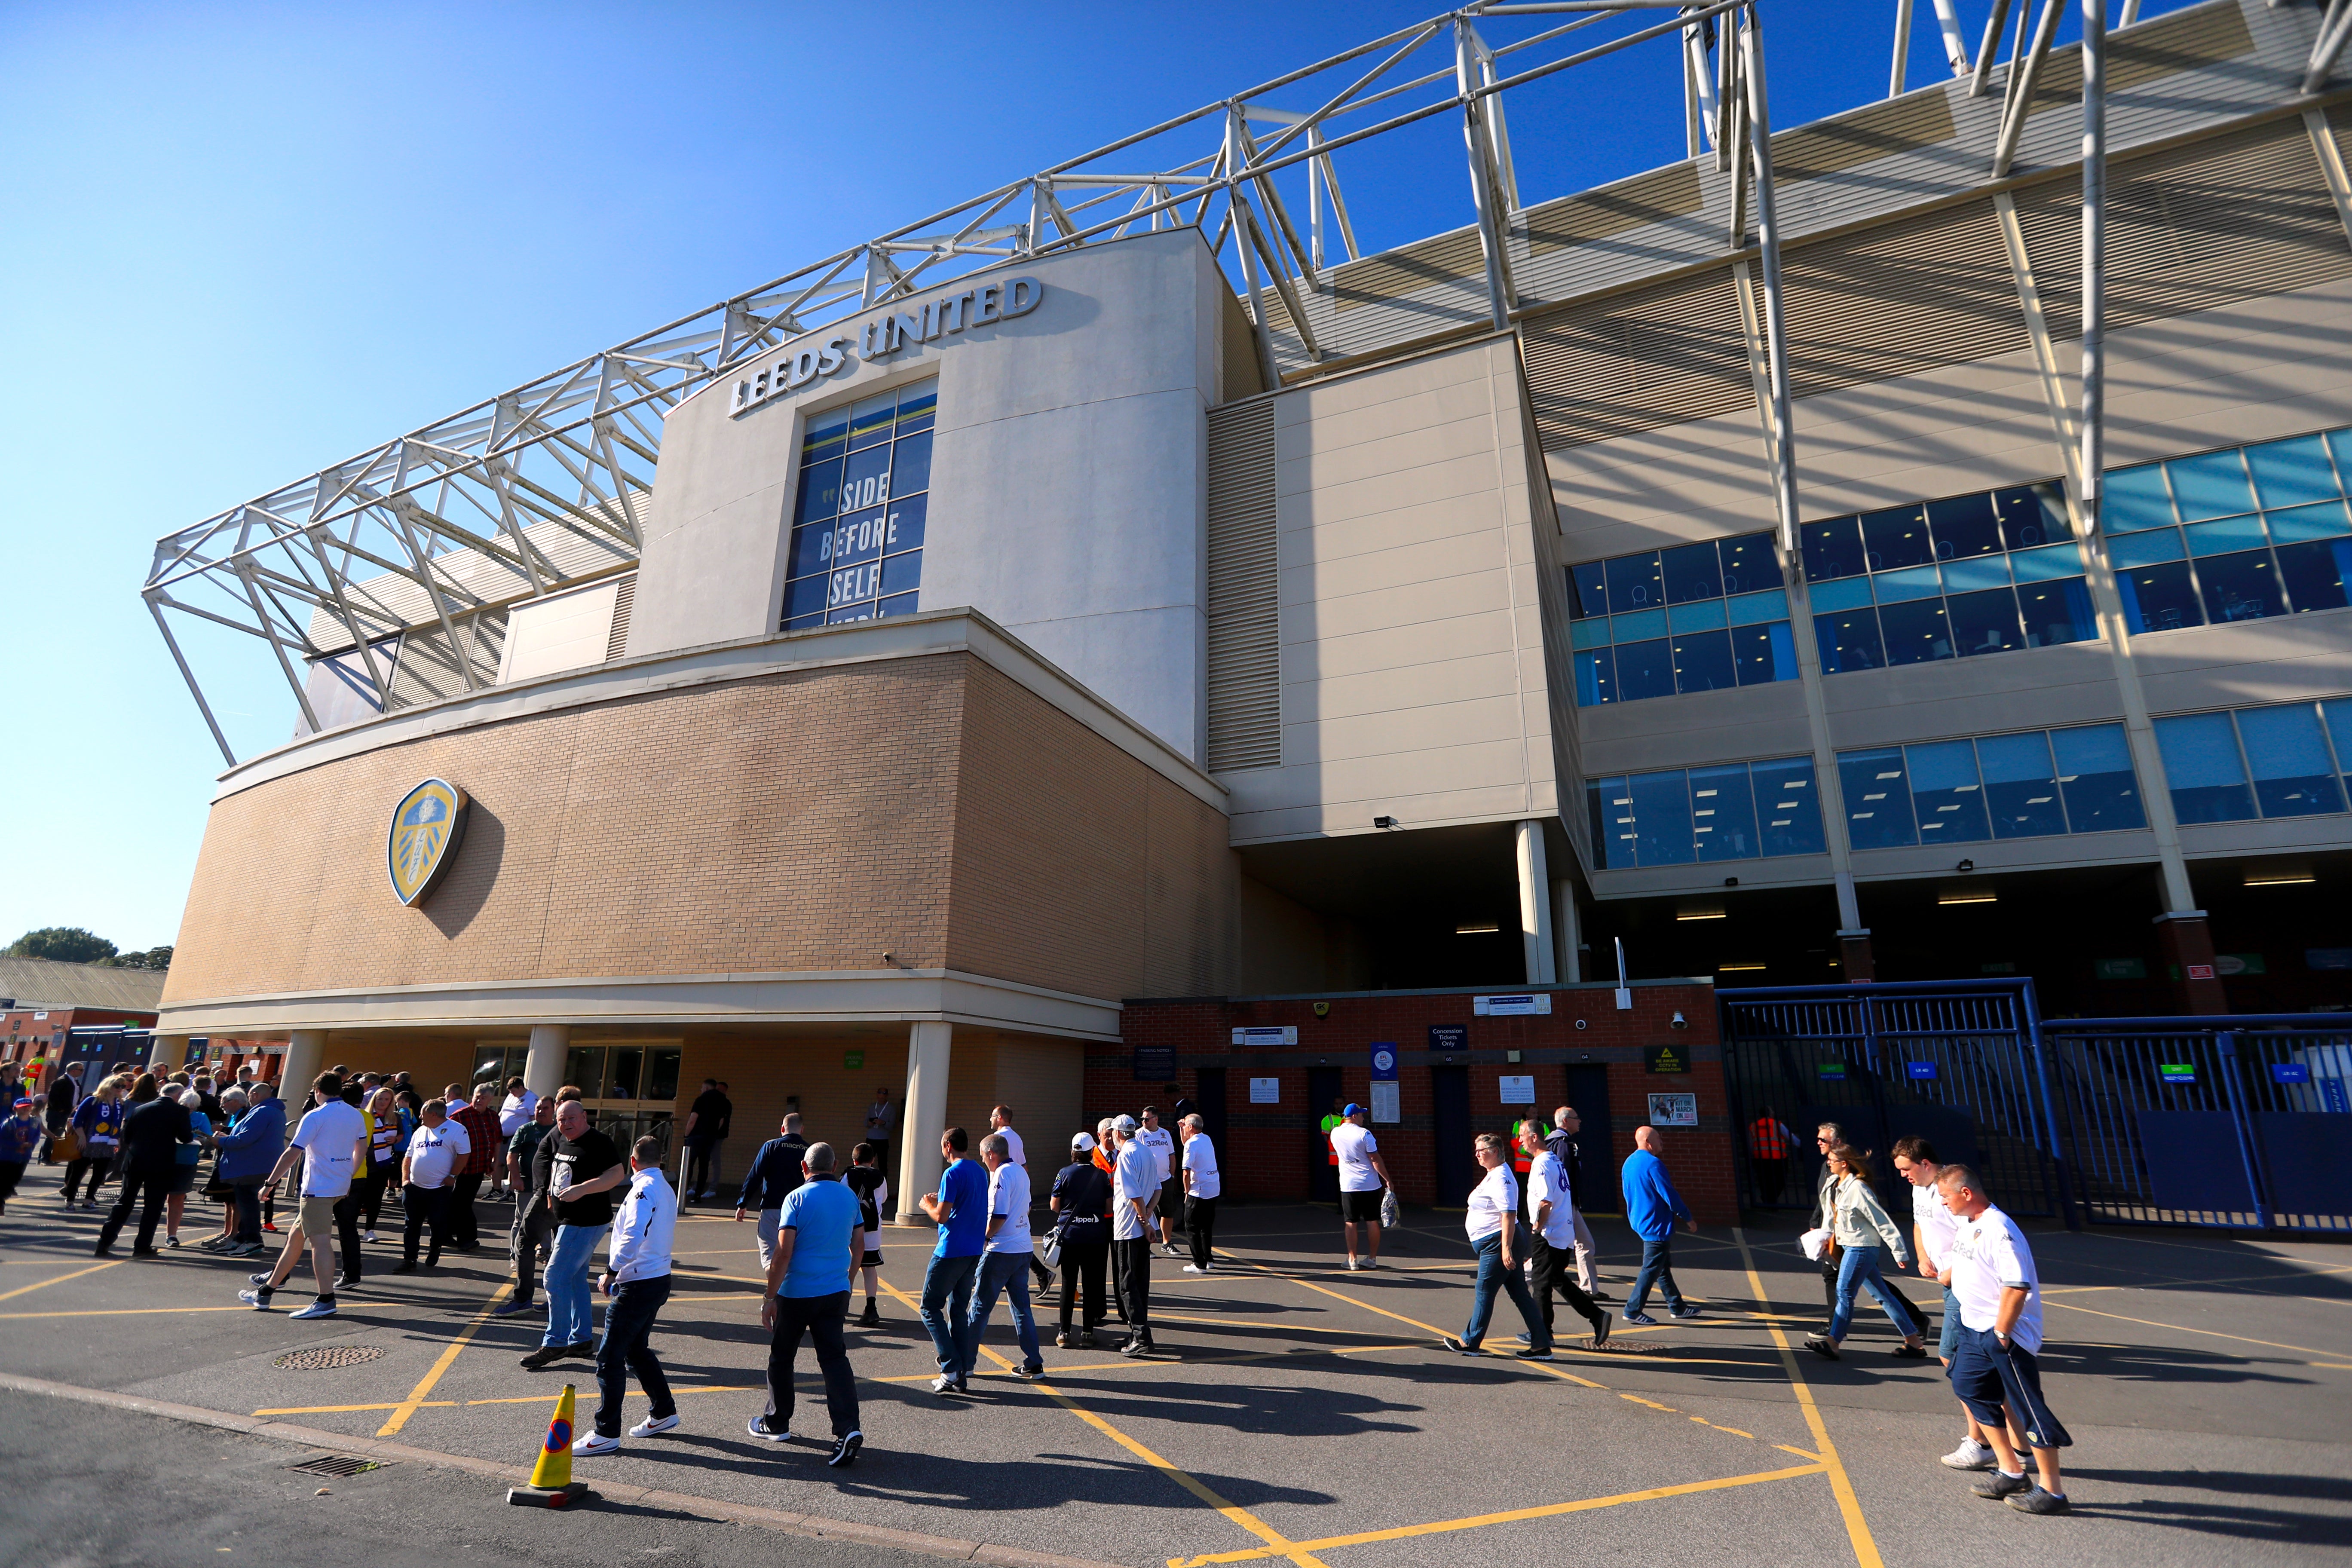 Leeds have condemned homophobic chants during their Premier League match against Crystal Palace at Elland Road (Mike Egerton/PA Images).